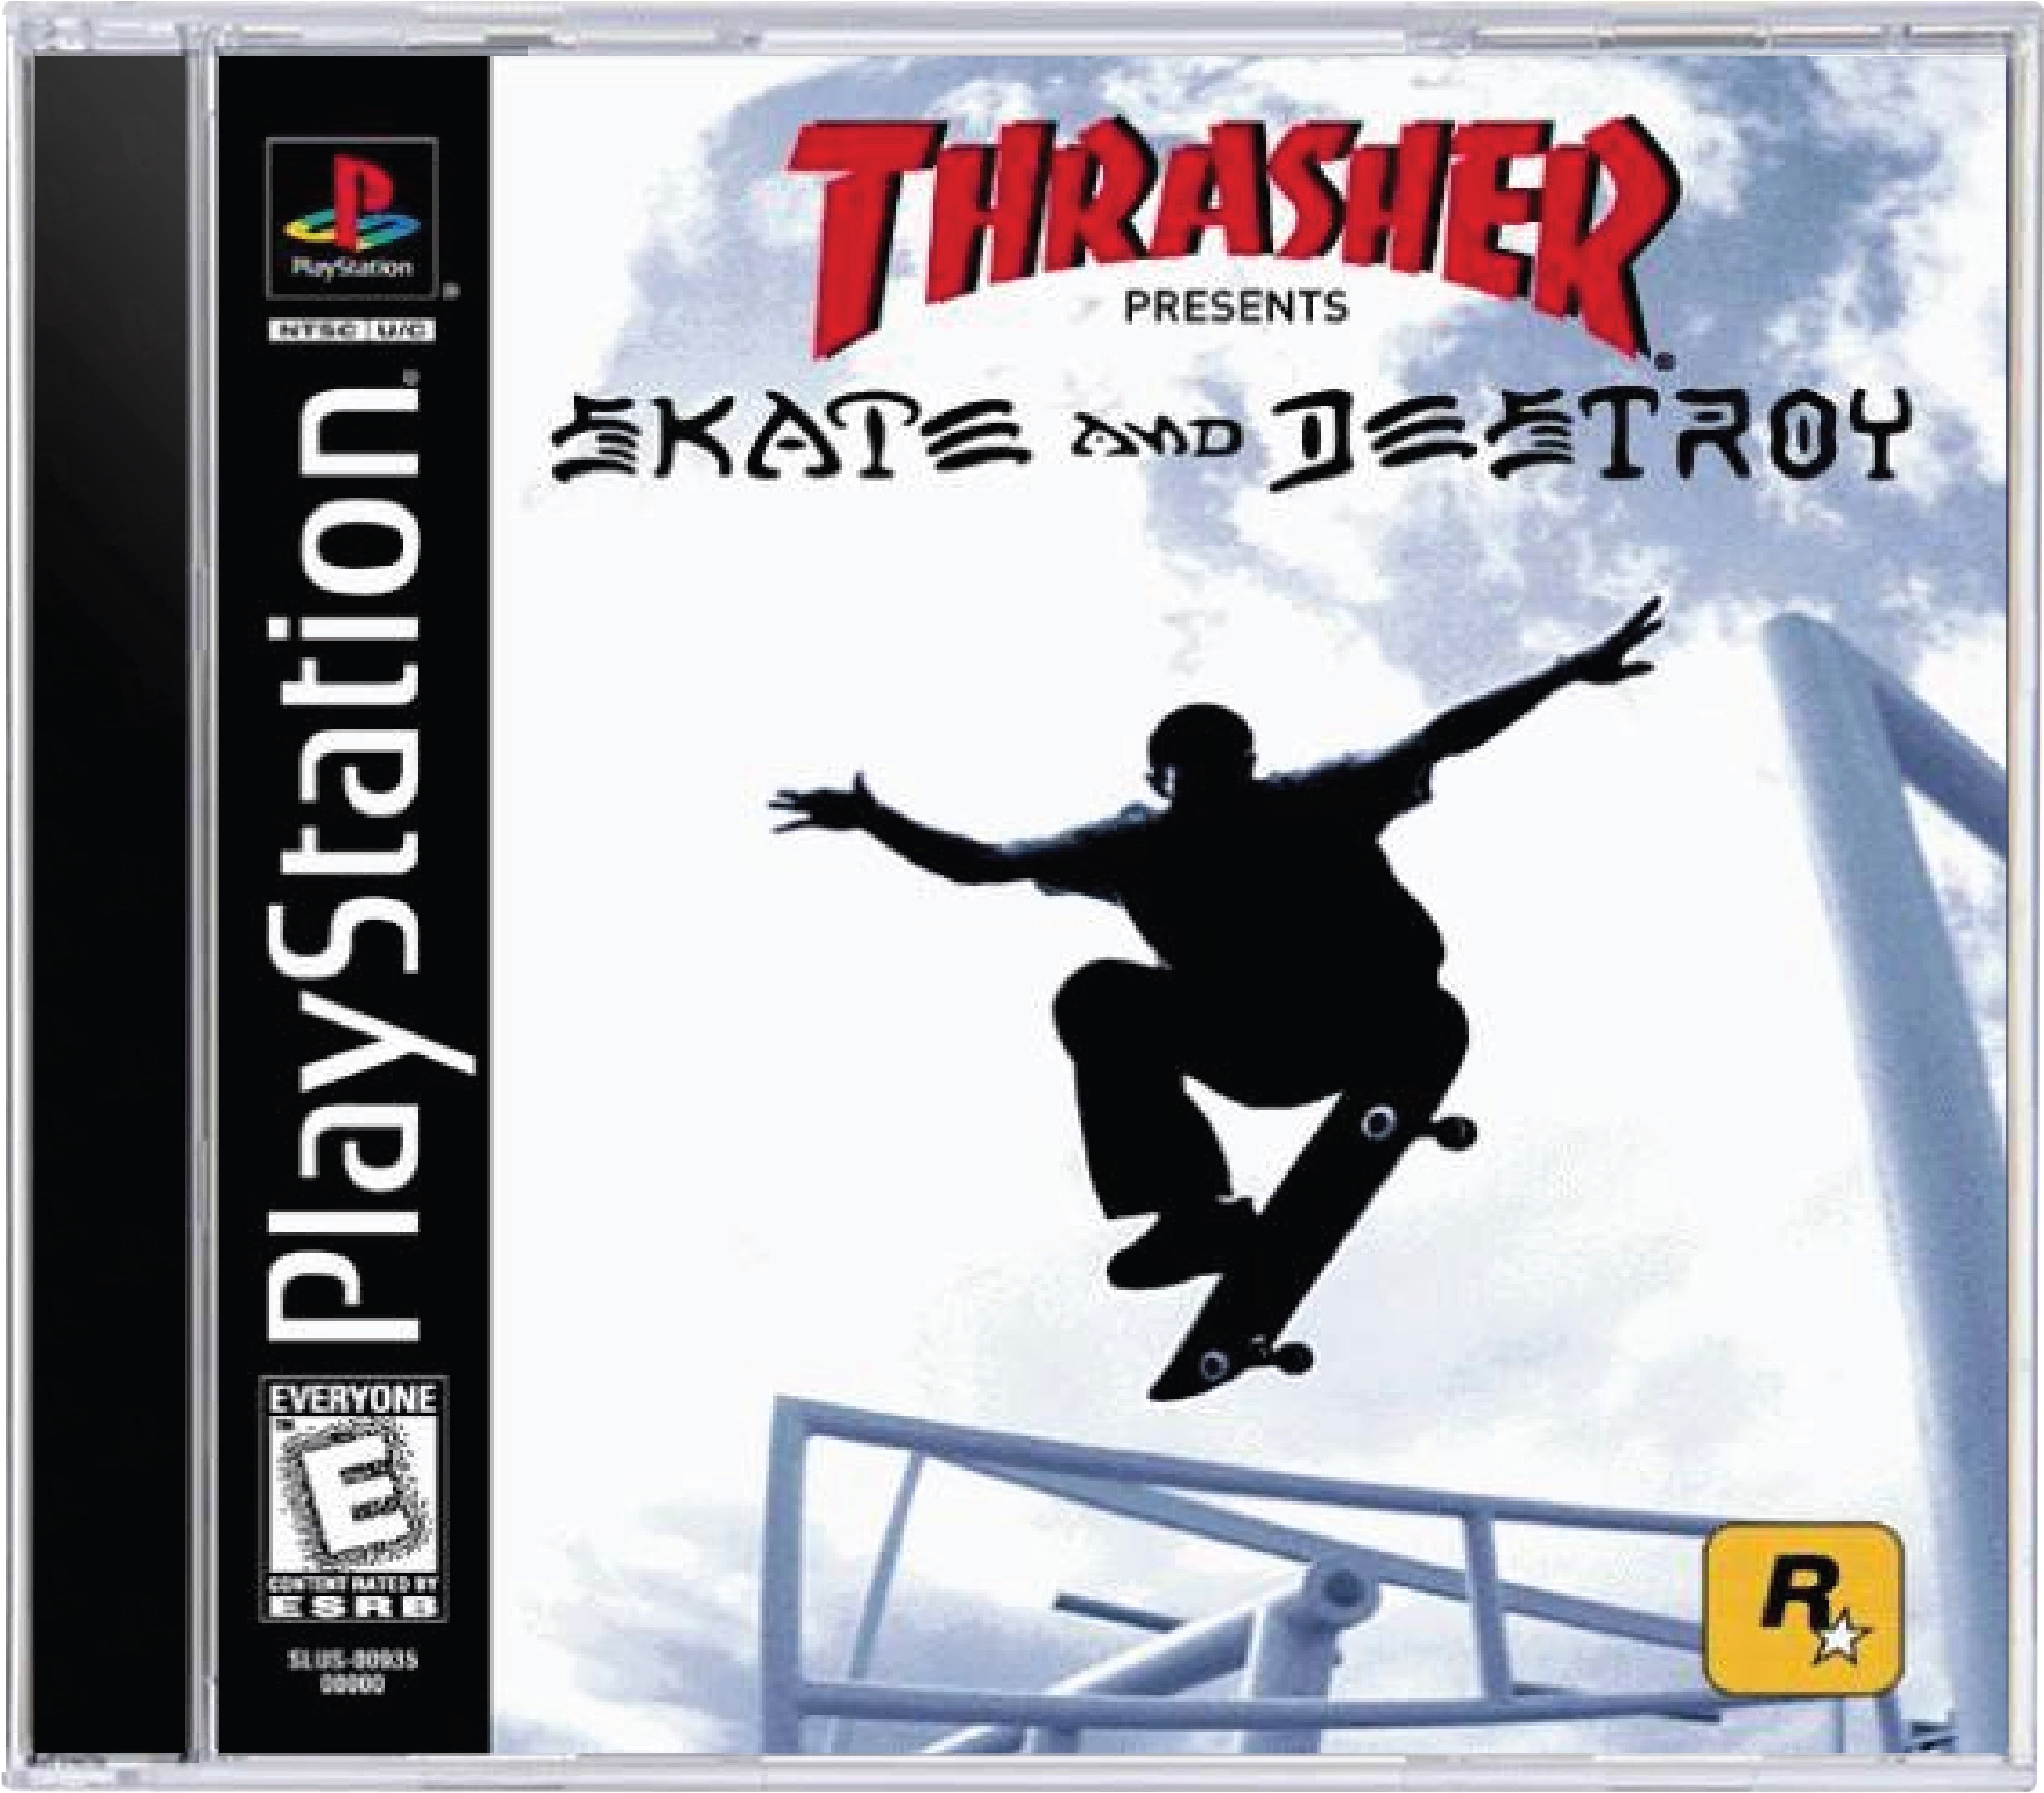 Thrasher Skate and Destroy Cover Art and Product Photo